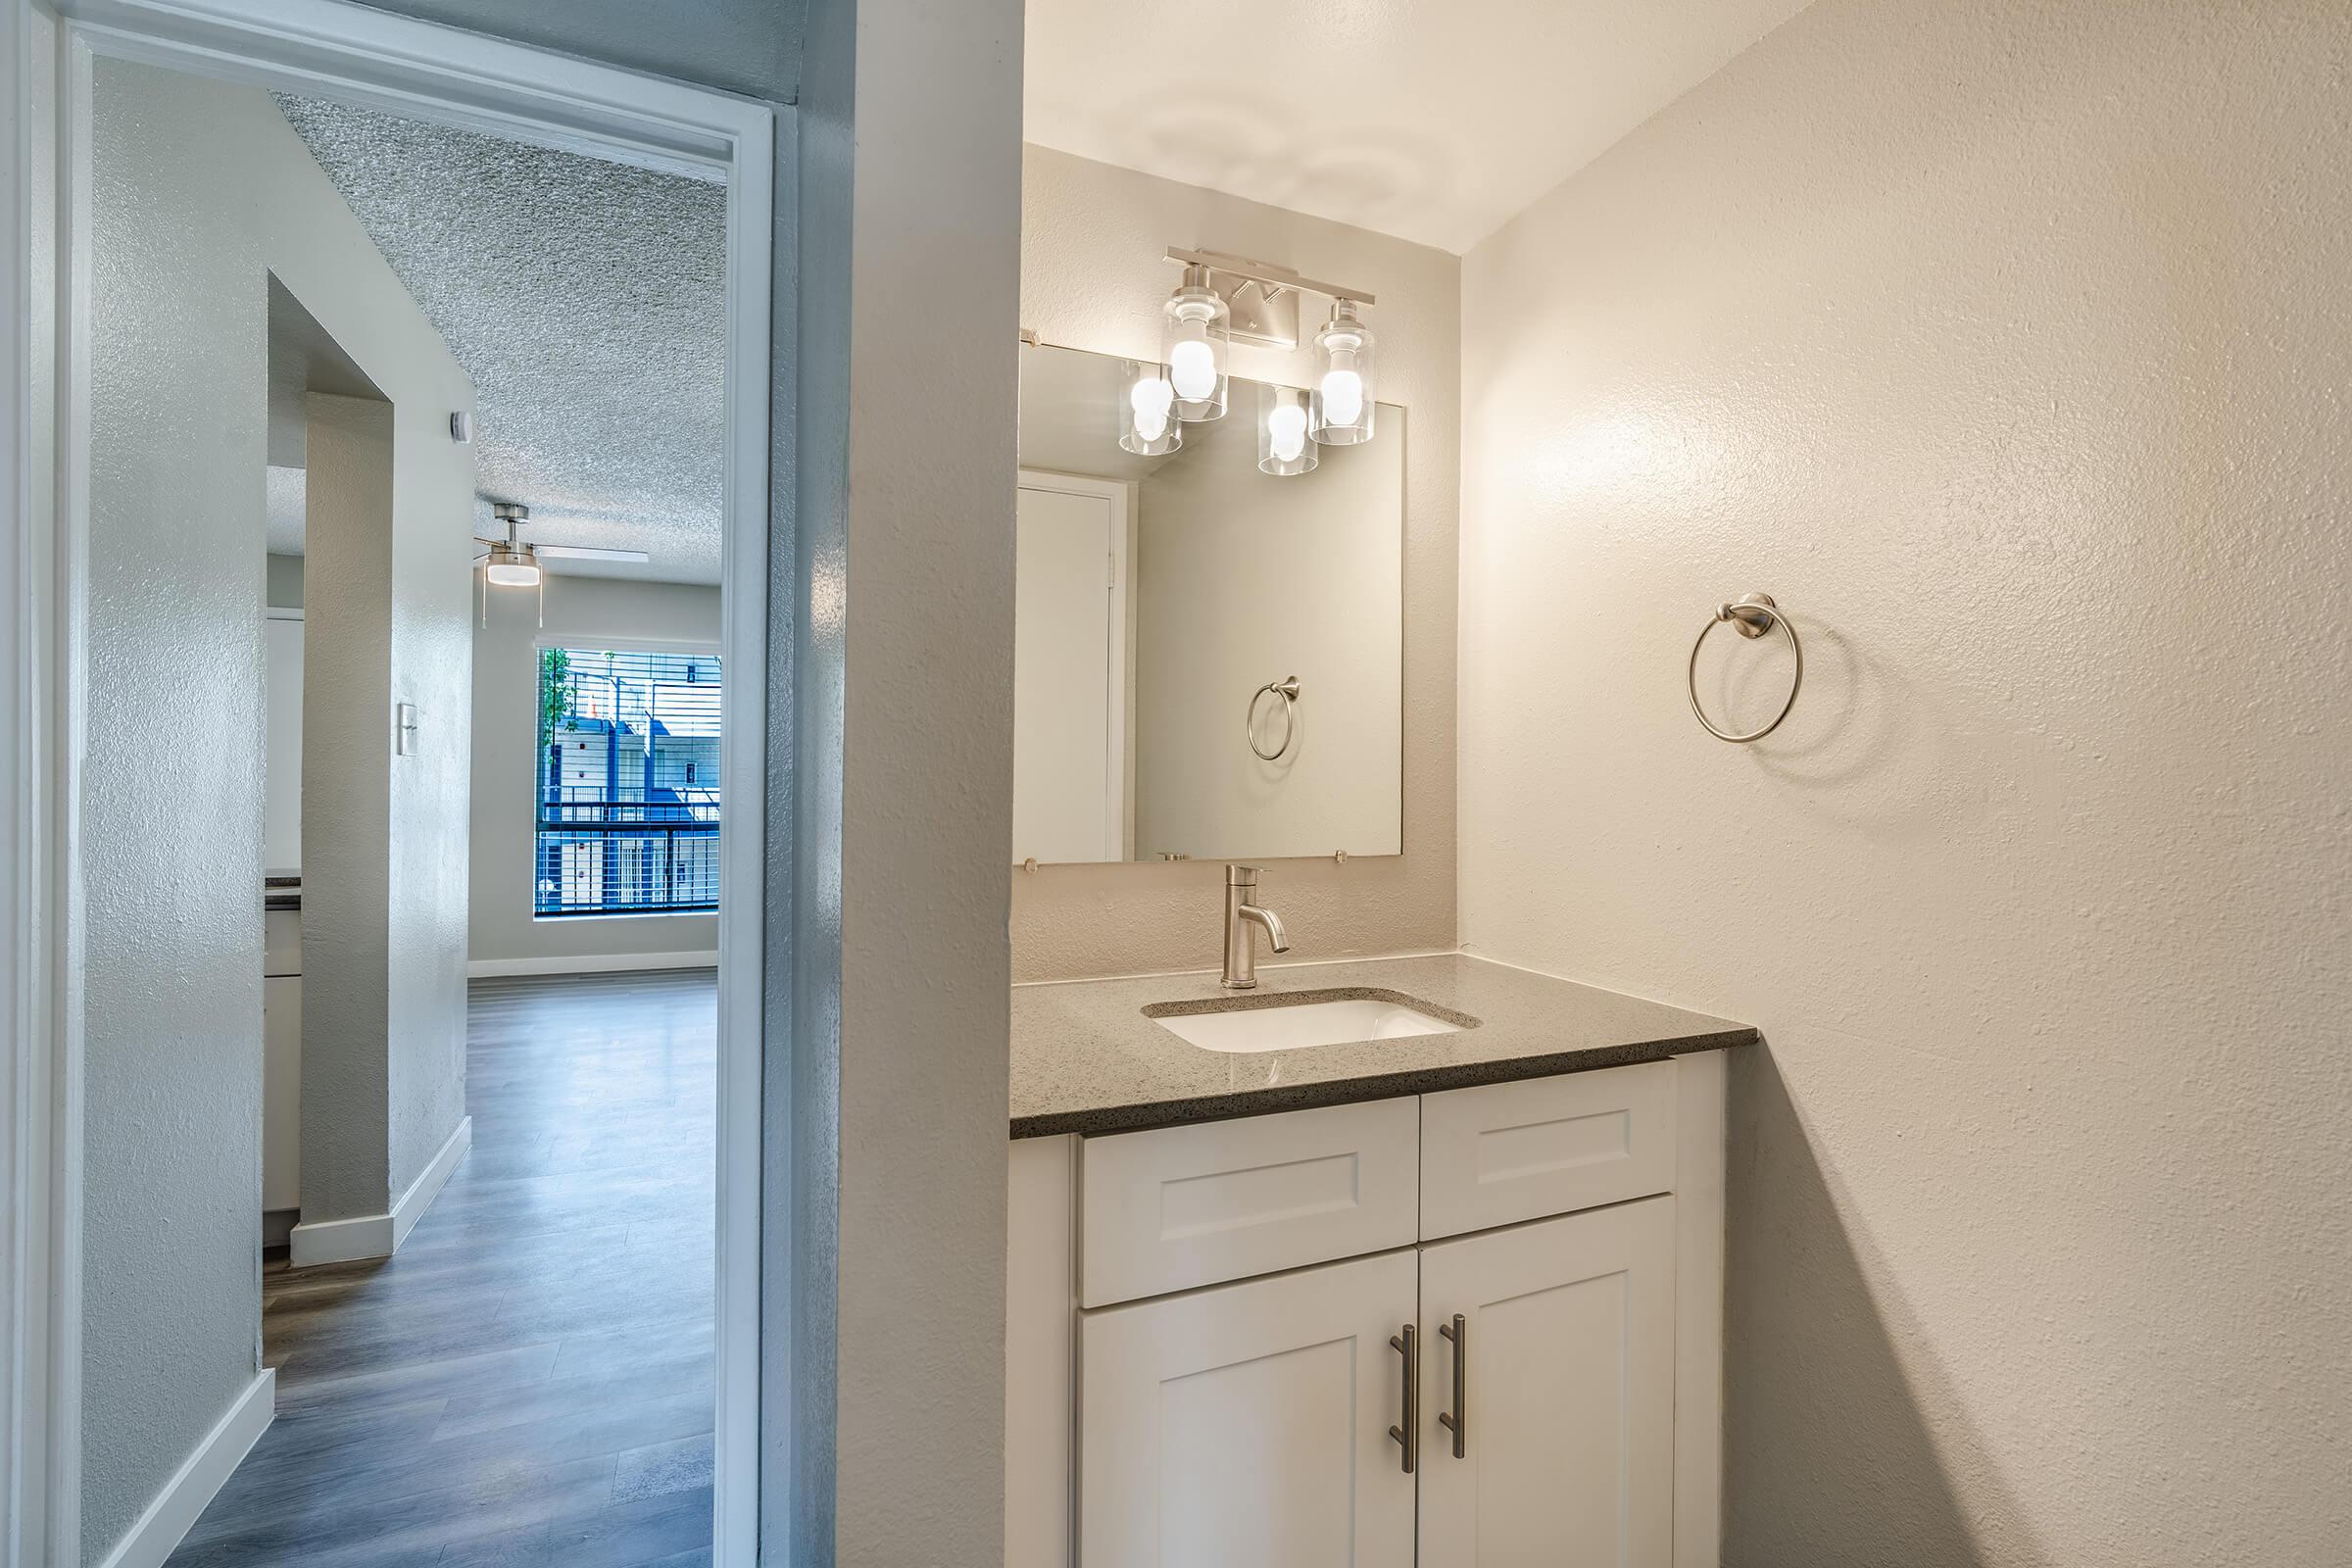 Bathroom with white cabinet vanity, mirror, and lighting fixture